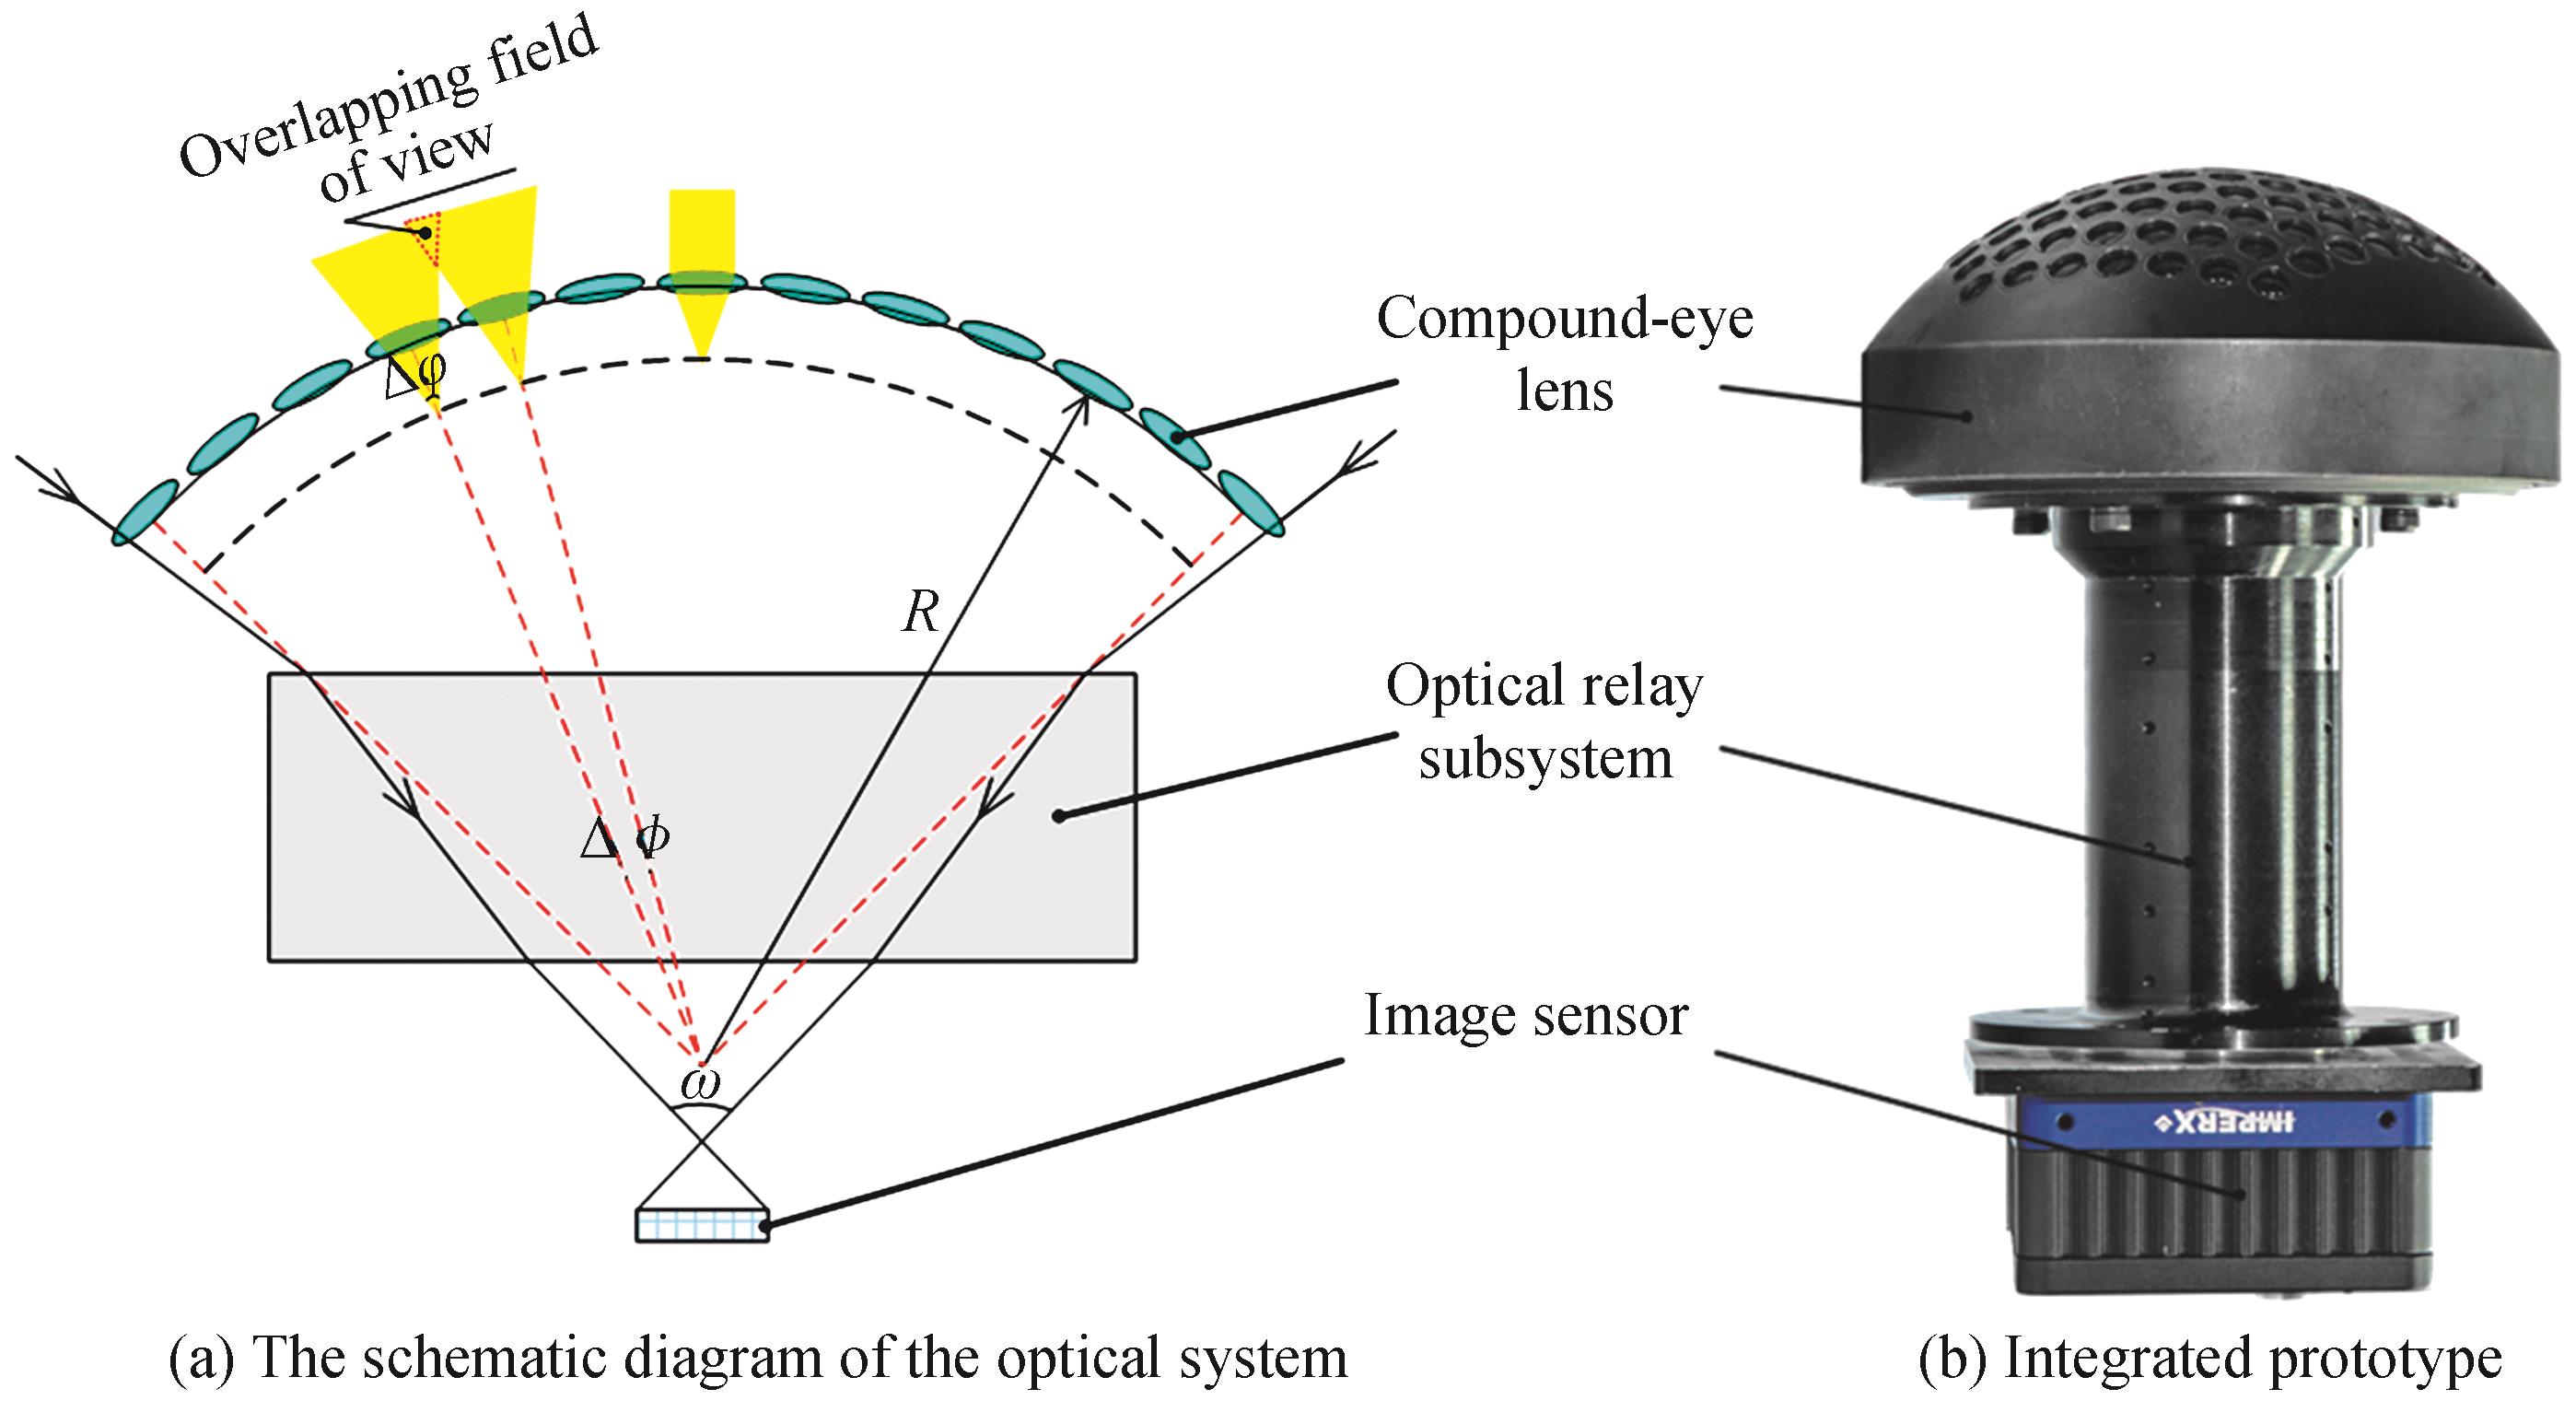 The biomimetic curved compound-eye imaging system